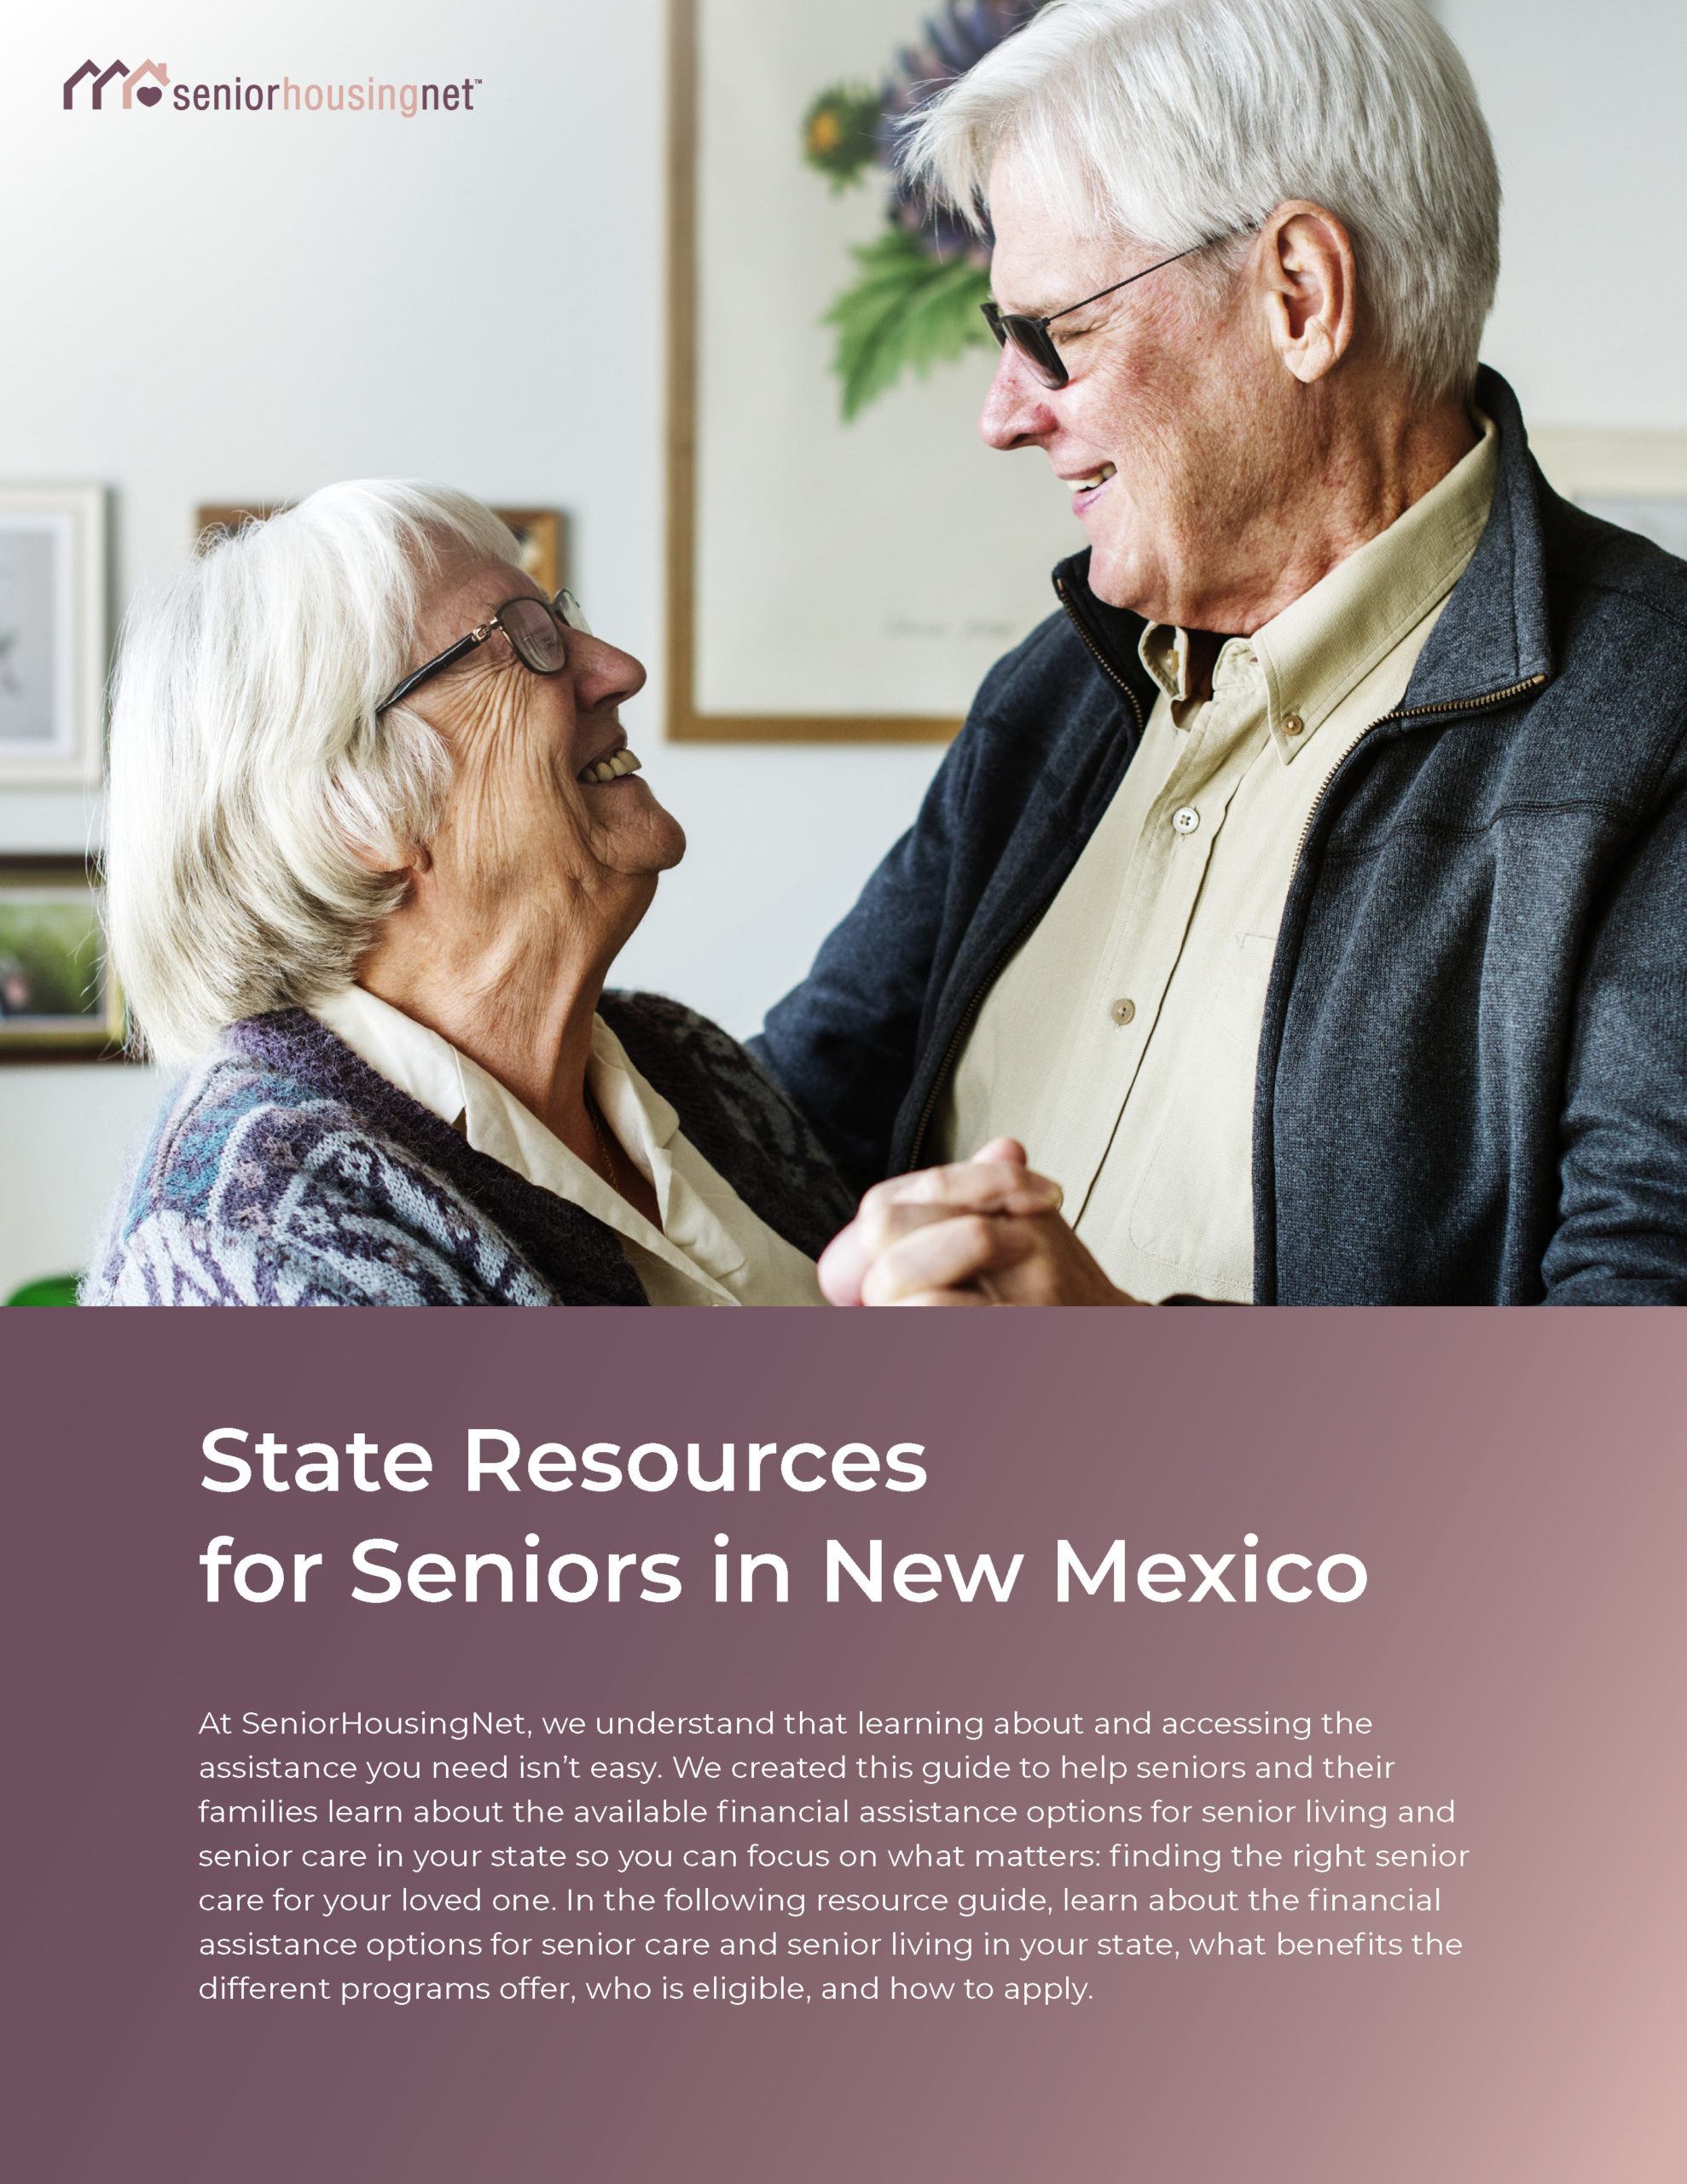 State Resources for Seniors in New Mexico